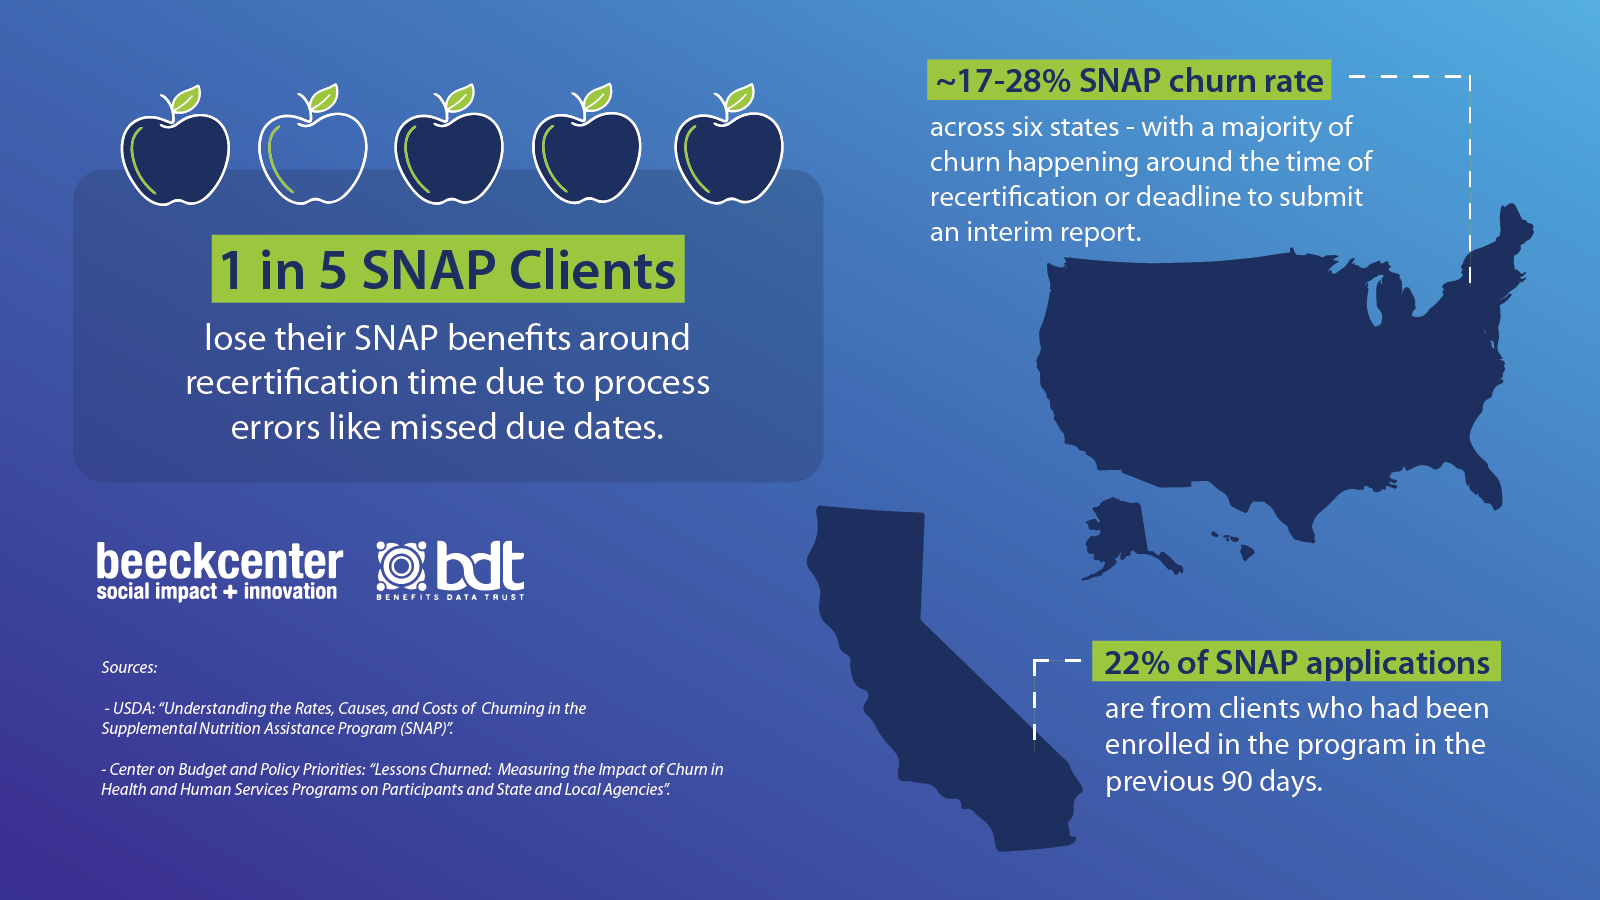 1 in 5 SNAP clients lose SNAP recertification benefits due to process errors